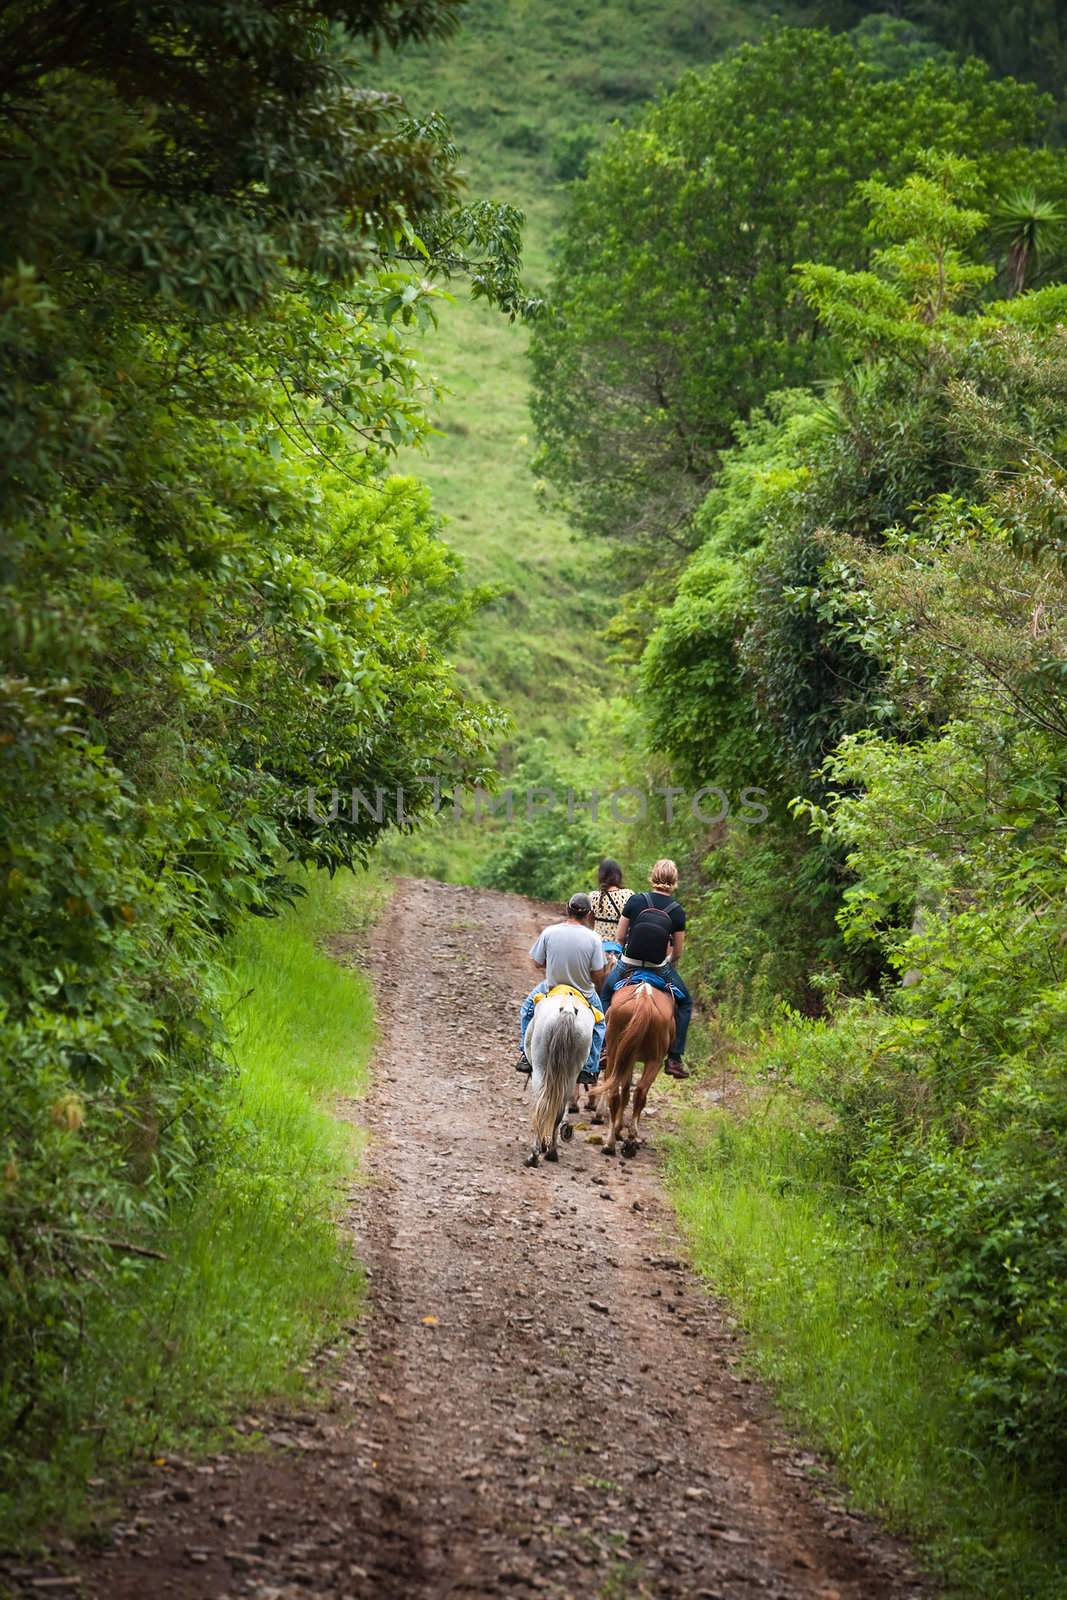 Tourists on horseback in Costa Rica by Creatista